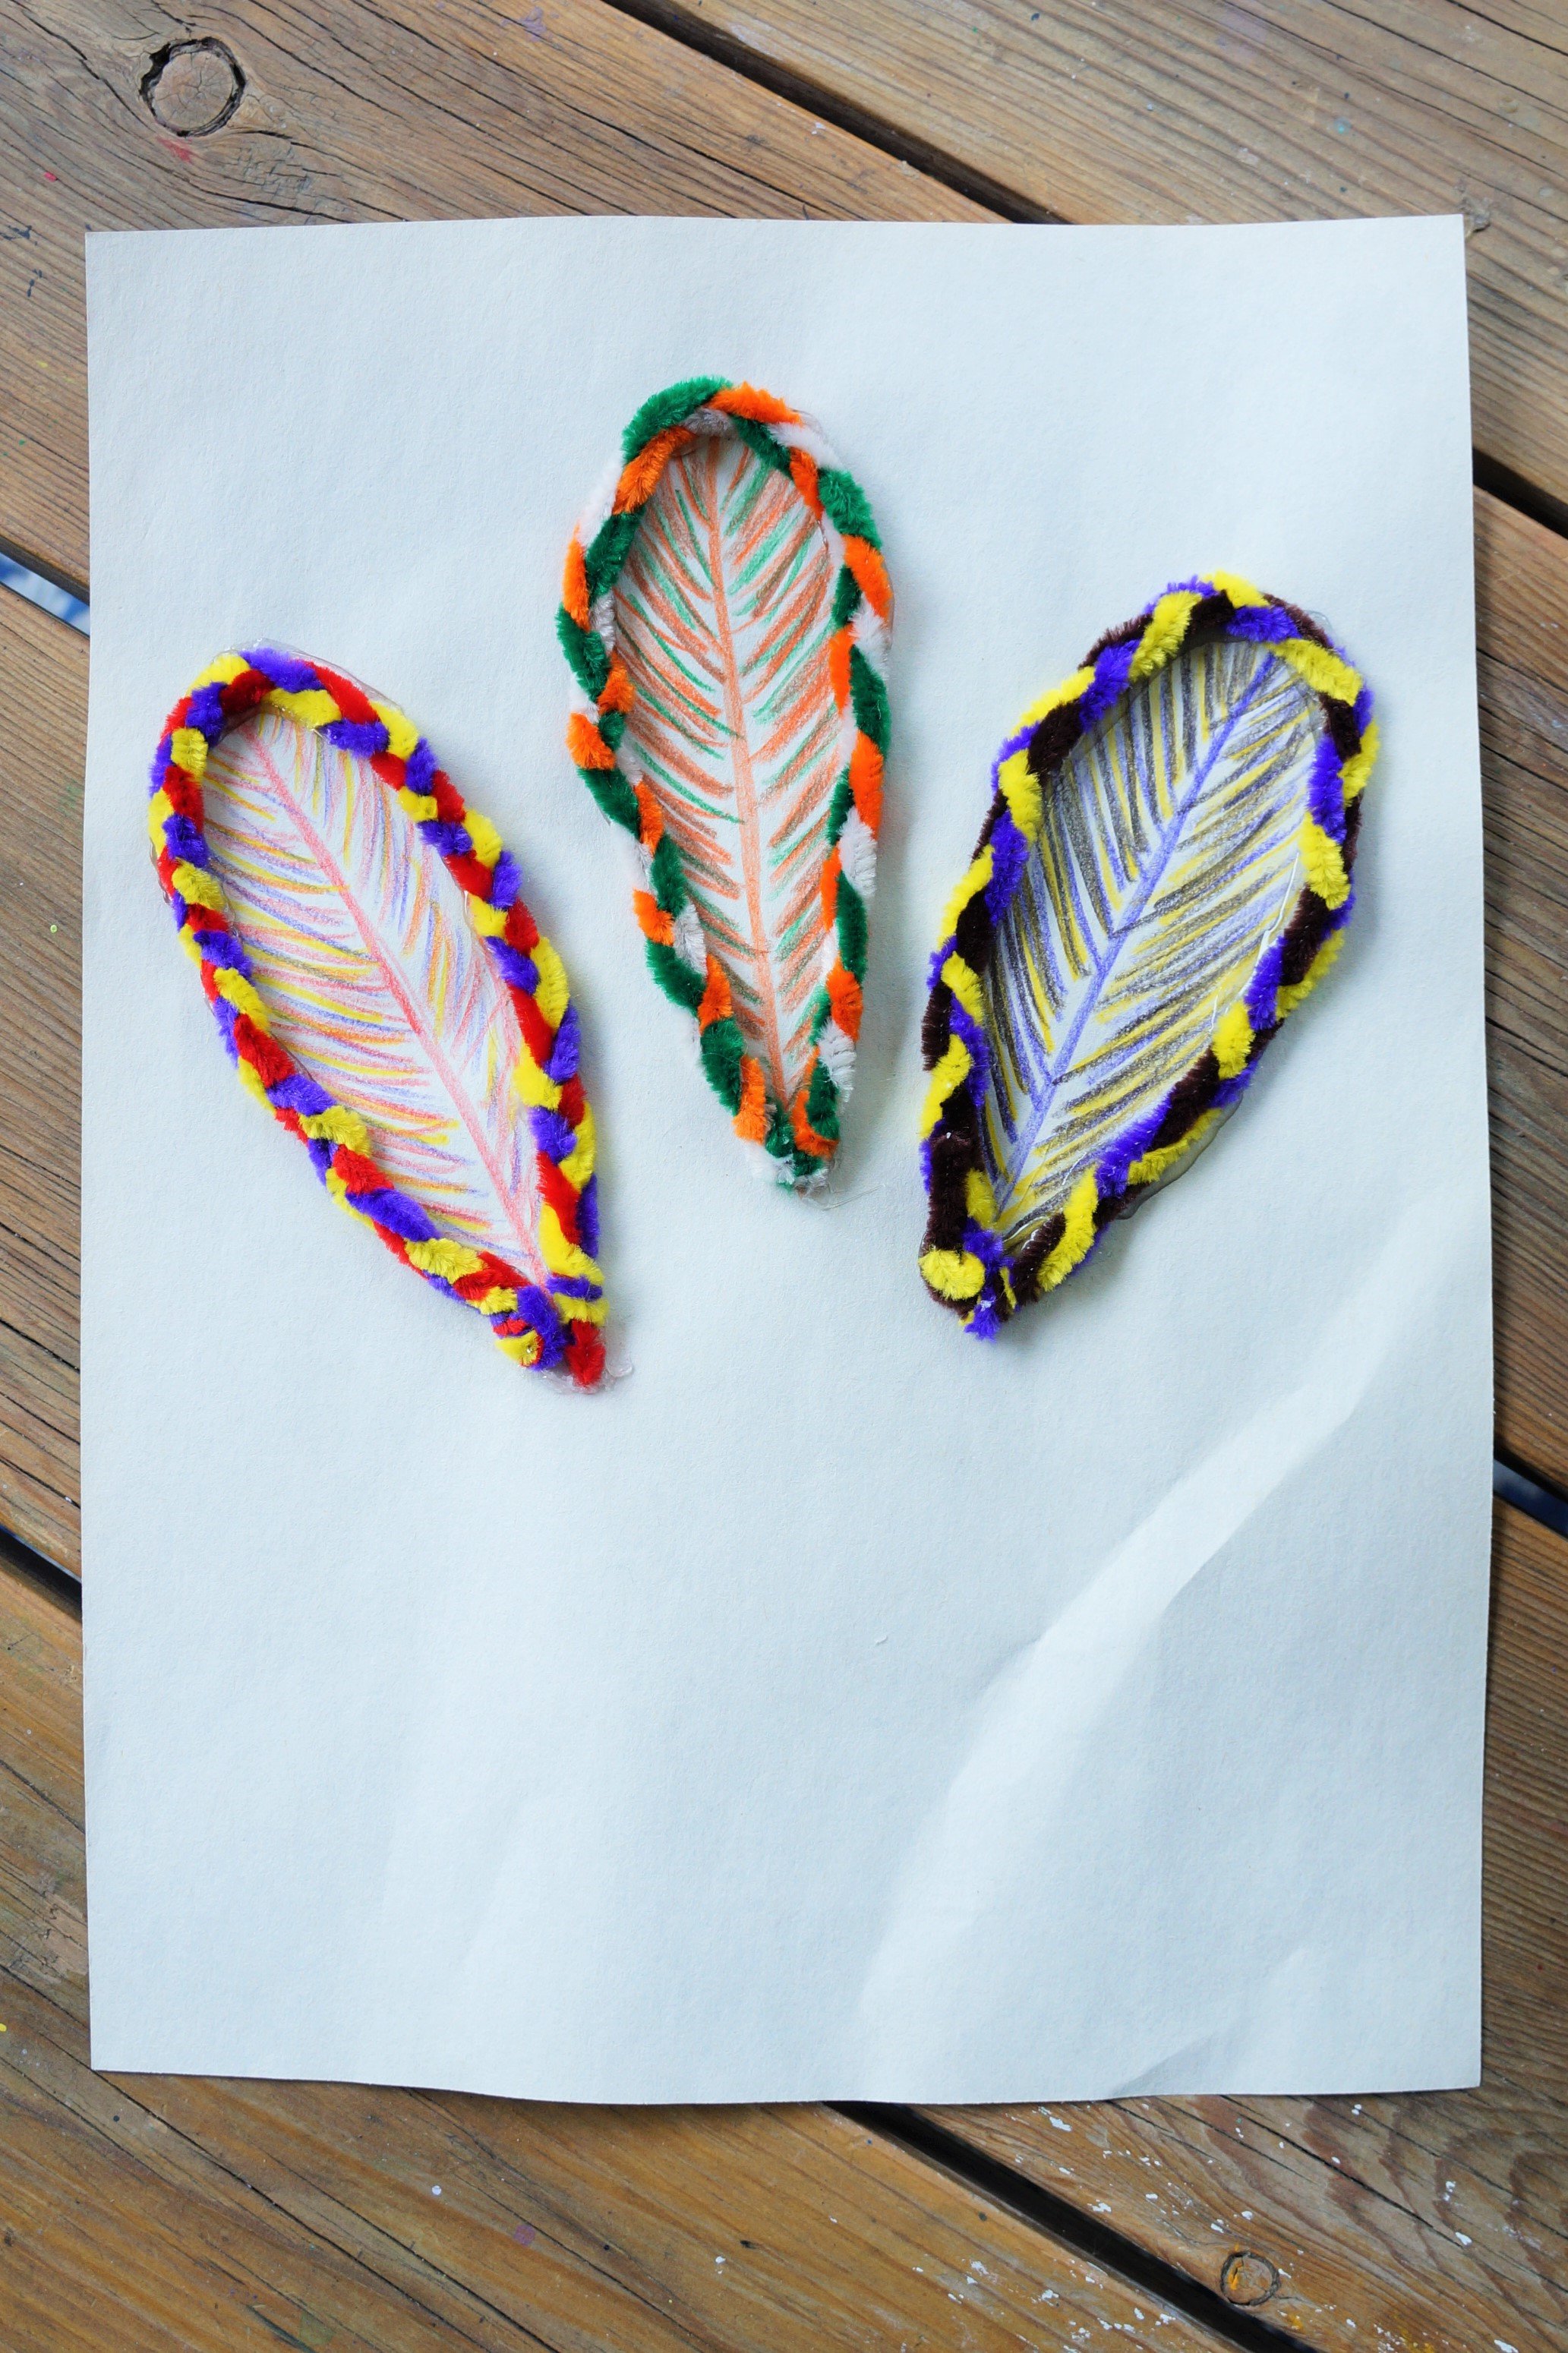 Pipecleaner Feather Peacock Craft - Artsy Craftsy Mom